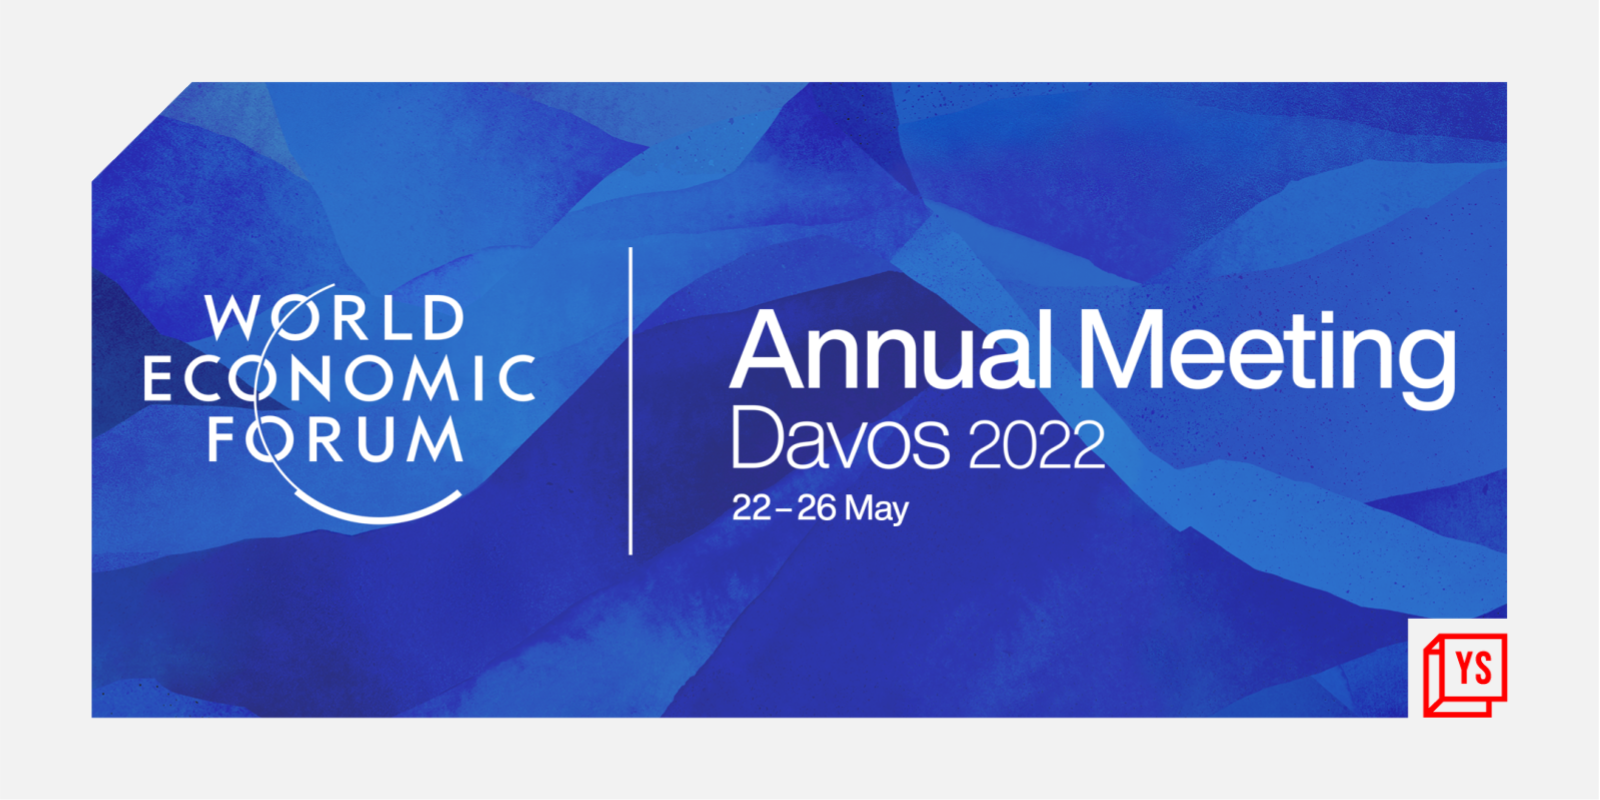 India sends nearly 100 business leaders to Davos